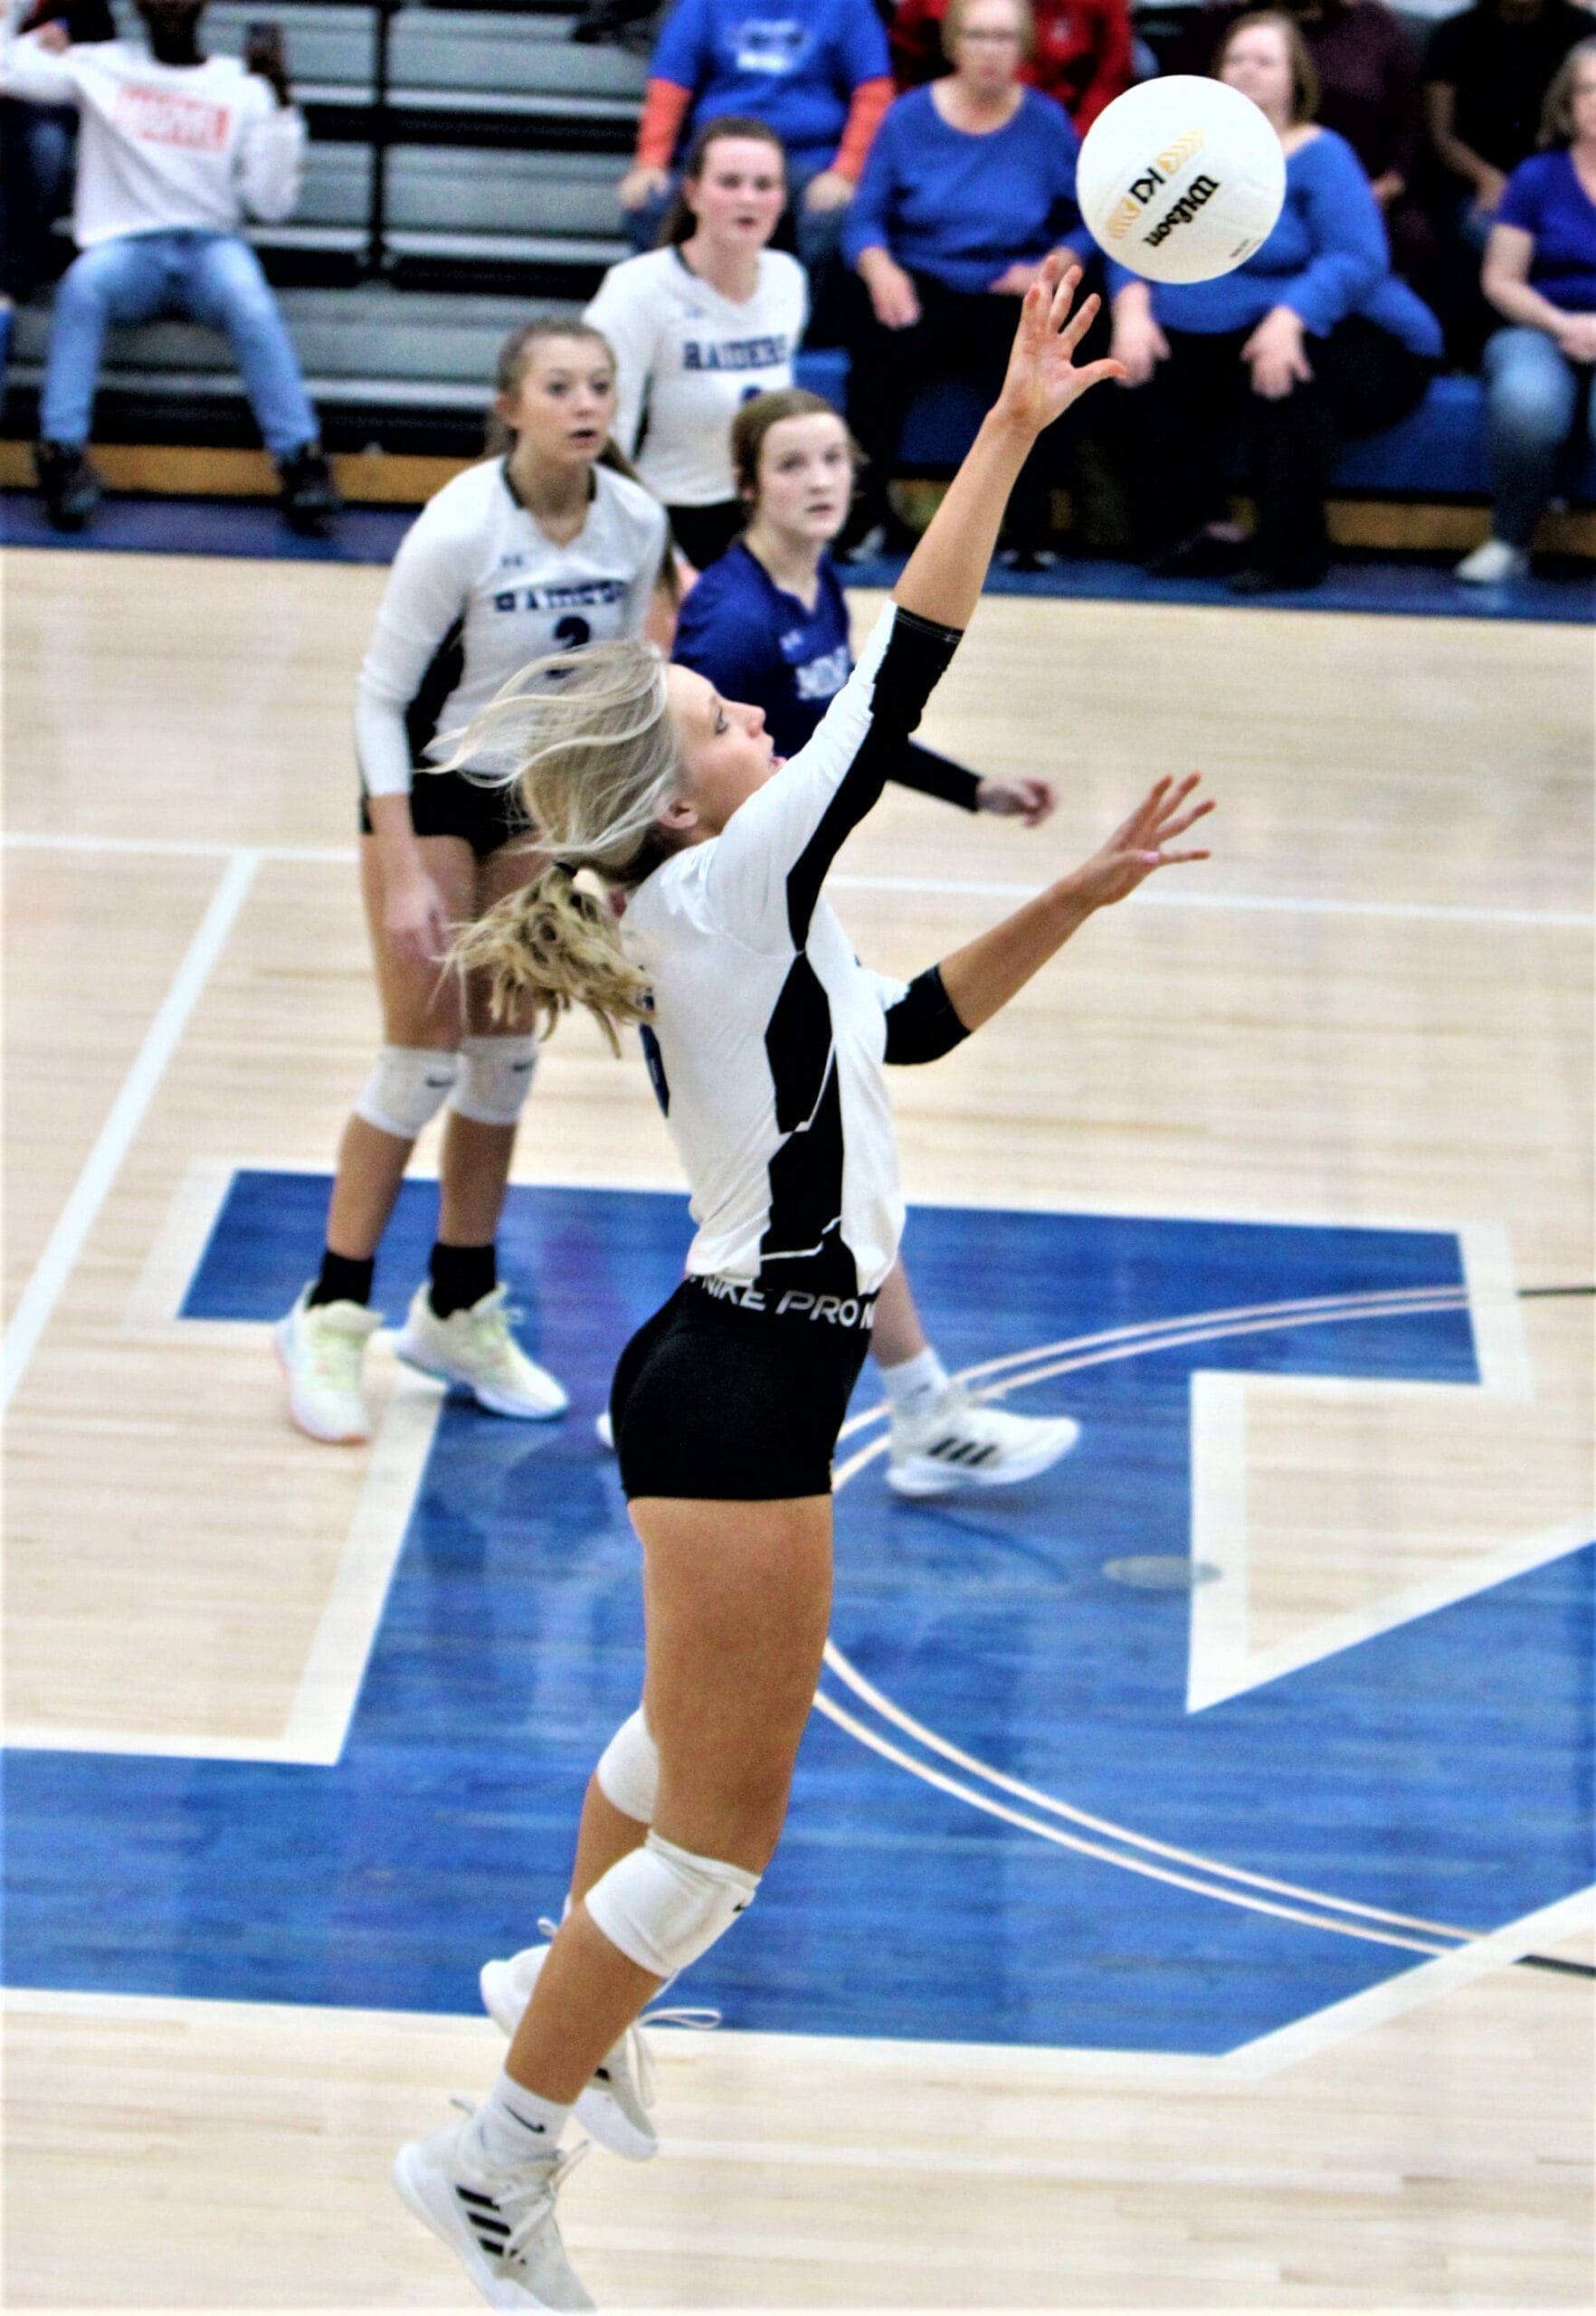 Raiders defeat Whiteville, 3-1, in fourth-round volleyball